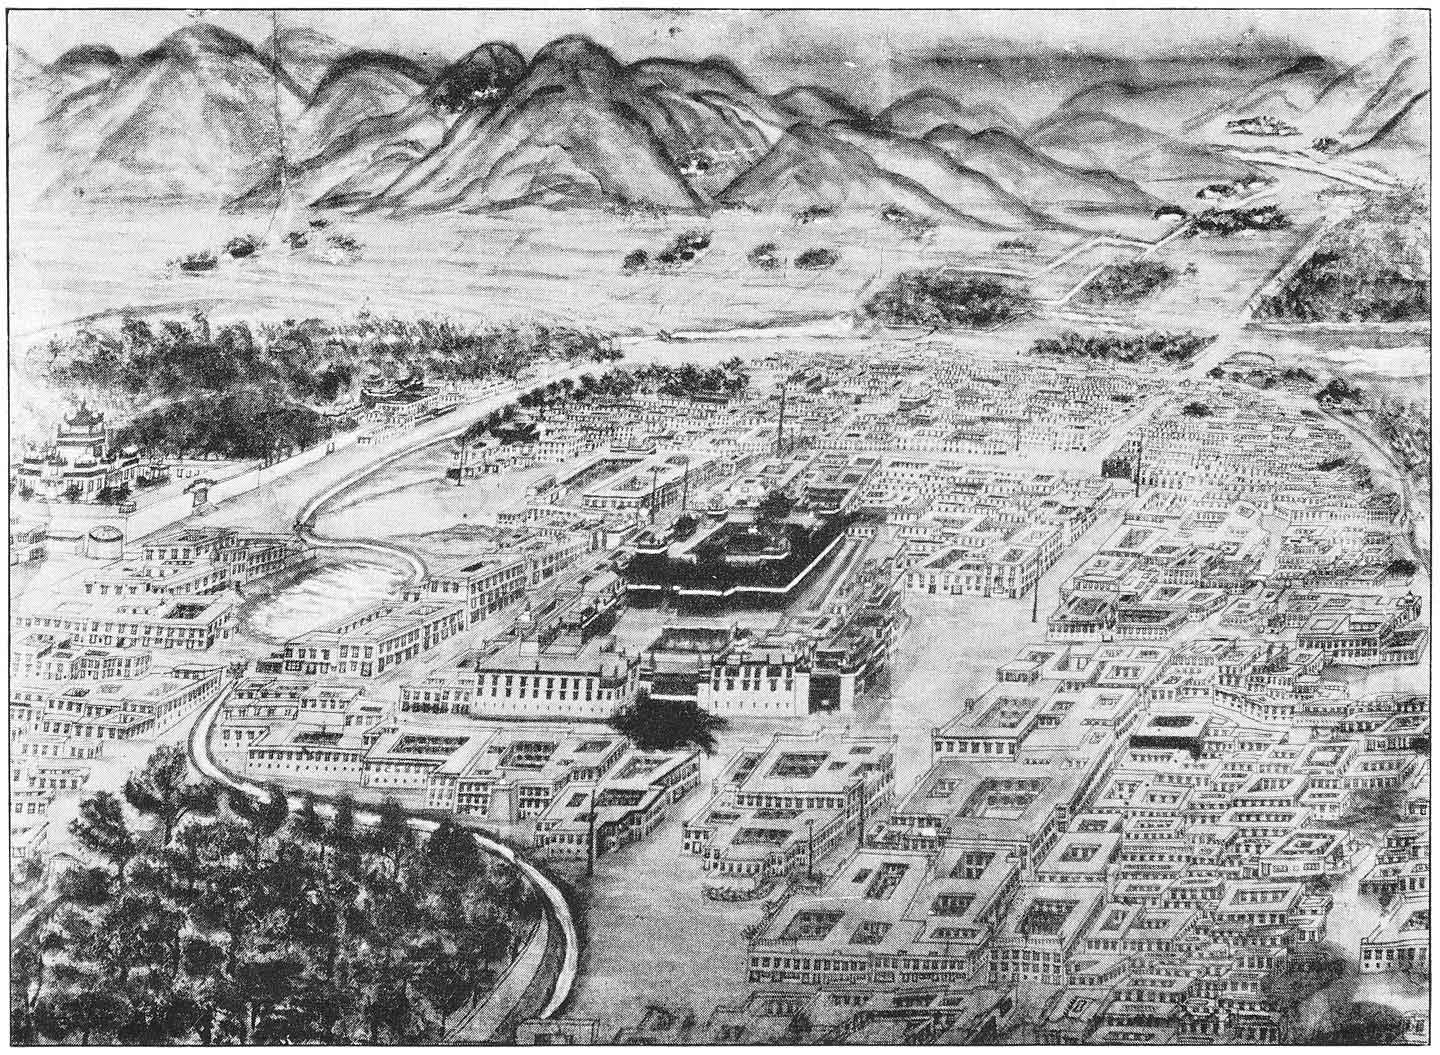 PLAN OF THE CITY OF LHASA.